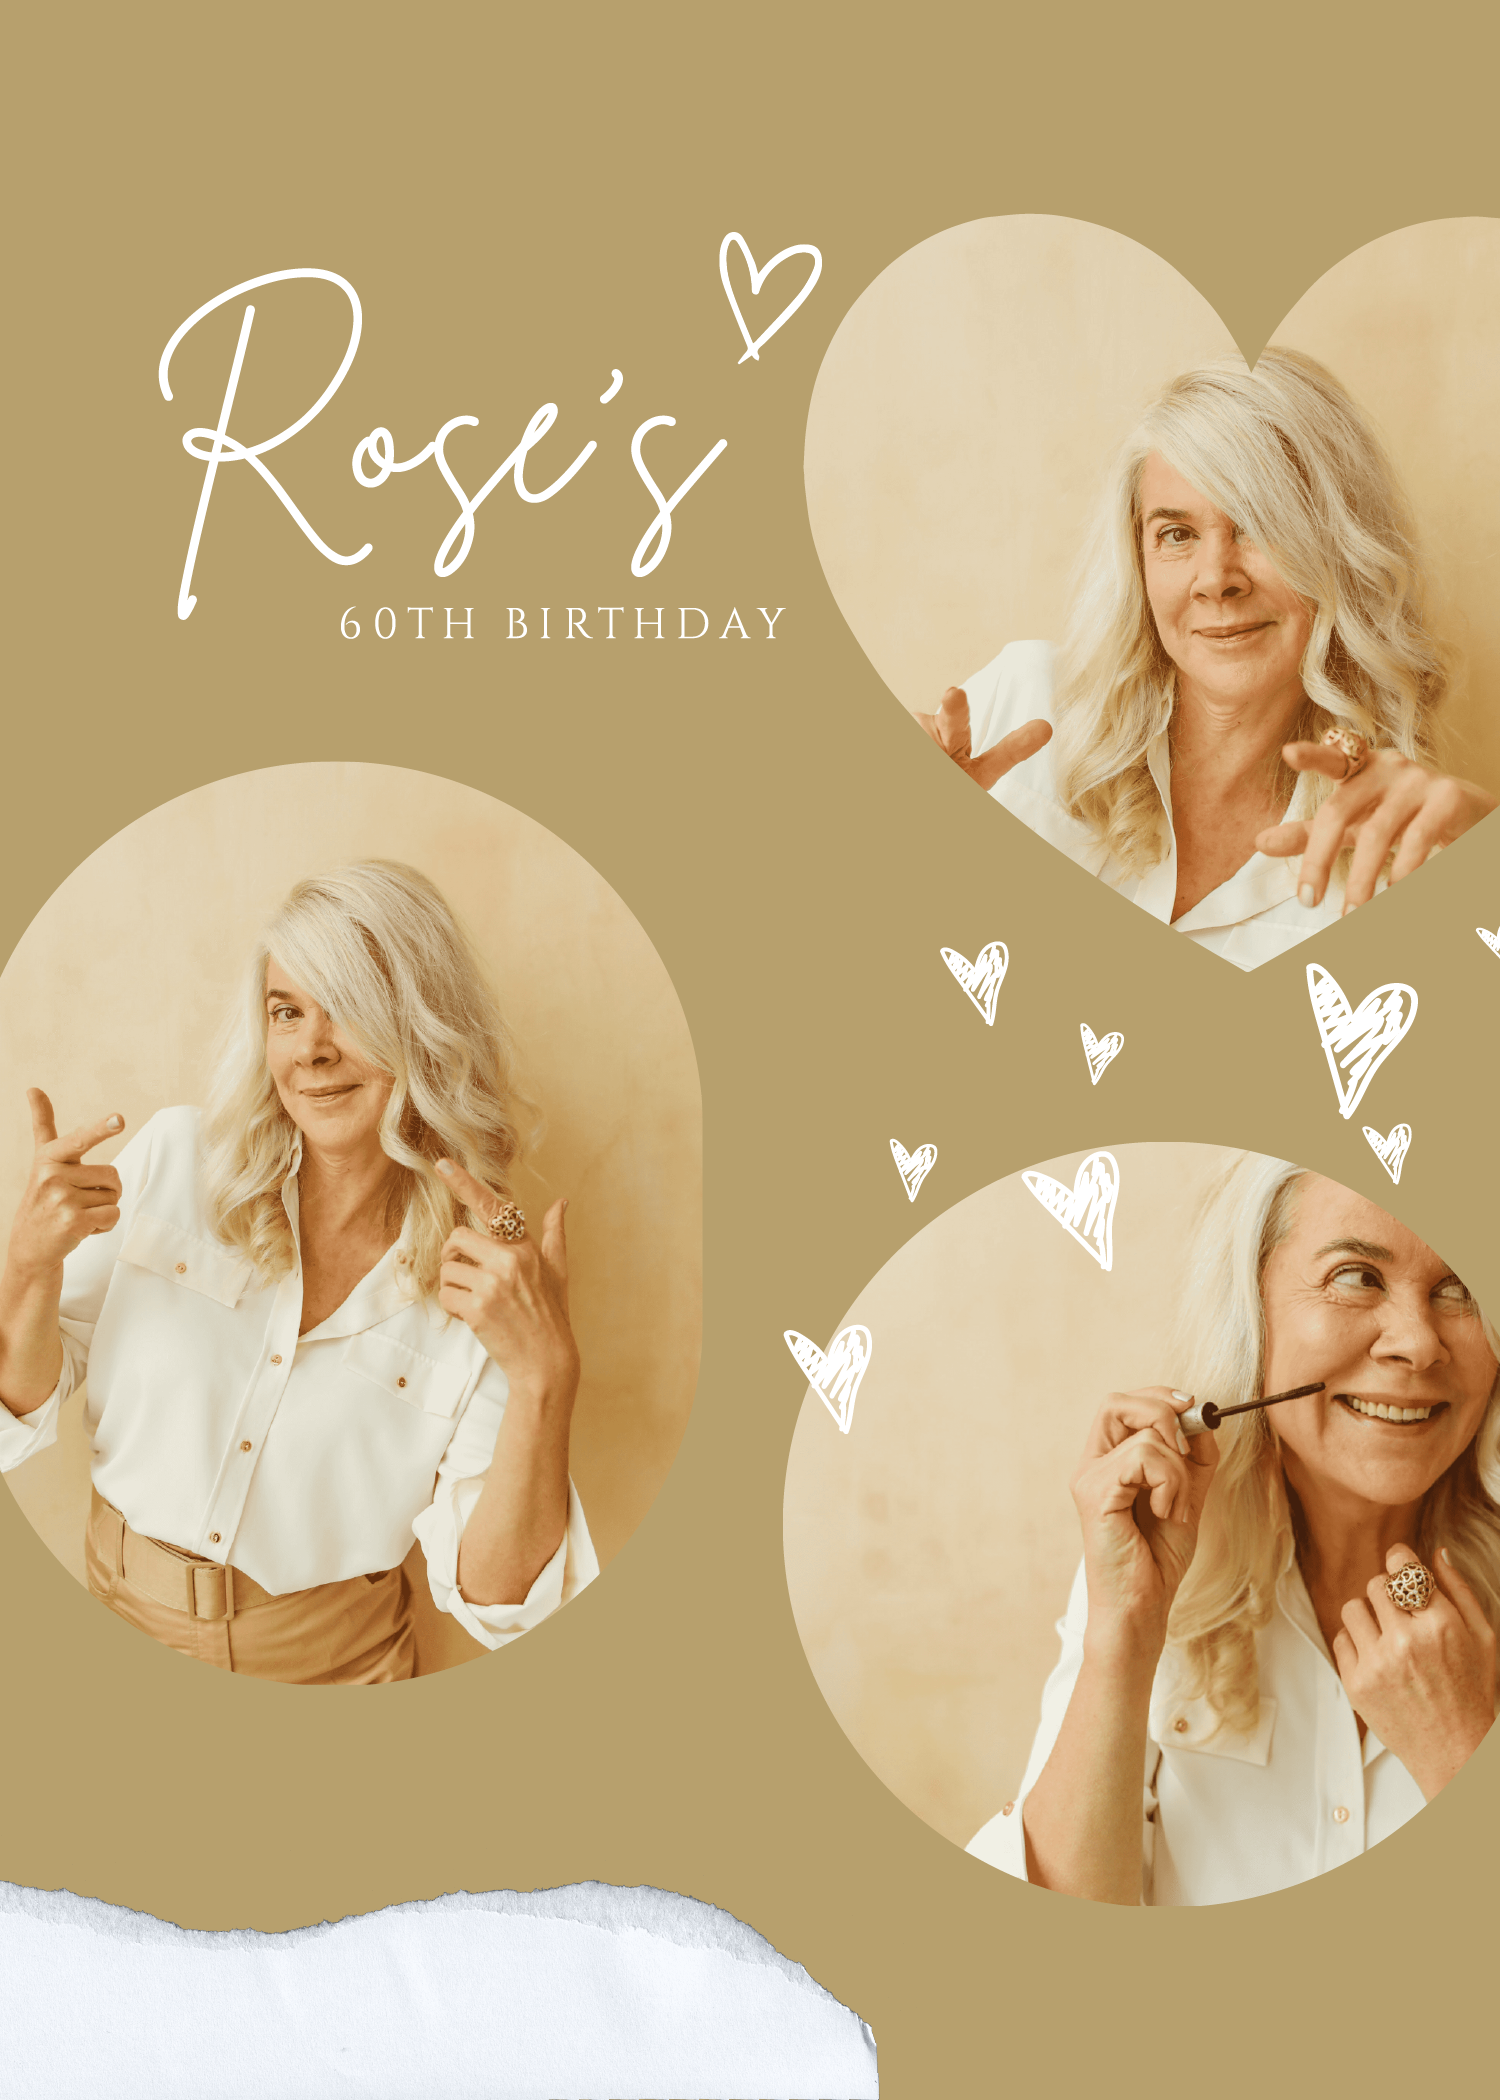 Rose Gold Photo Booth Template